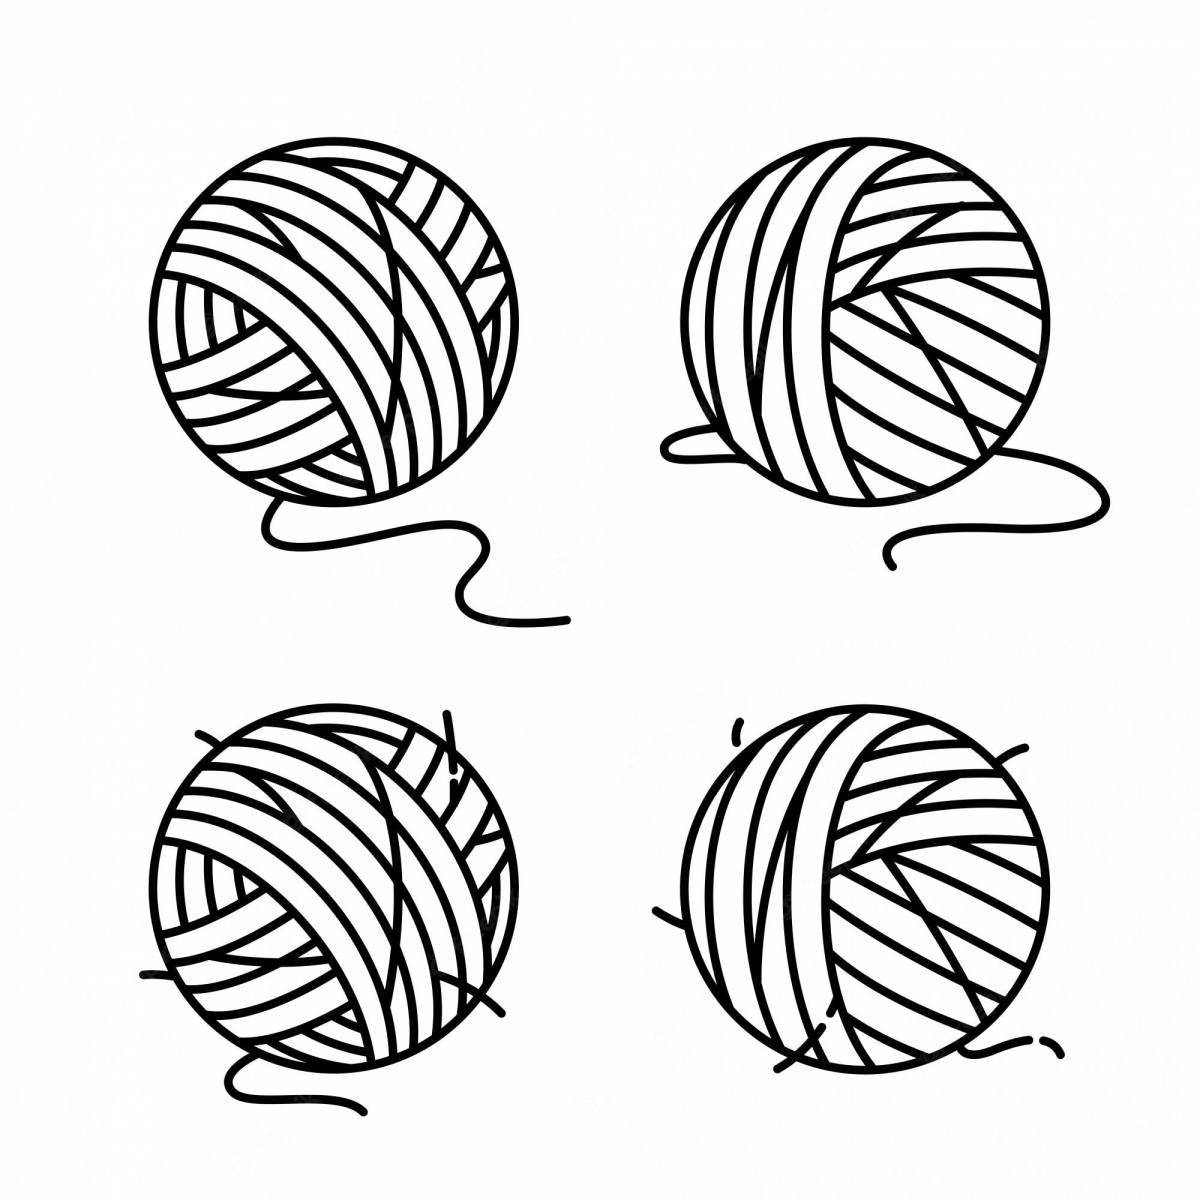 Coloring page wild ball of thread